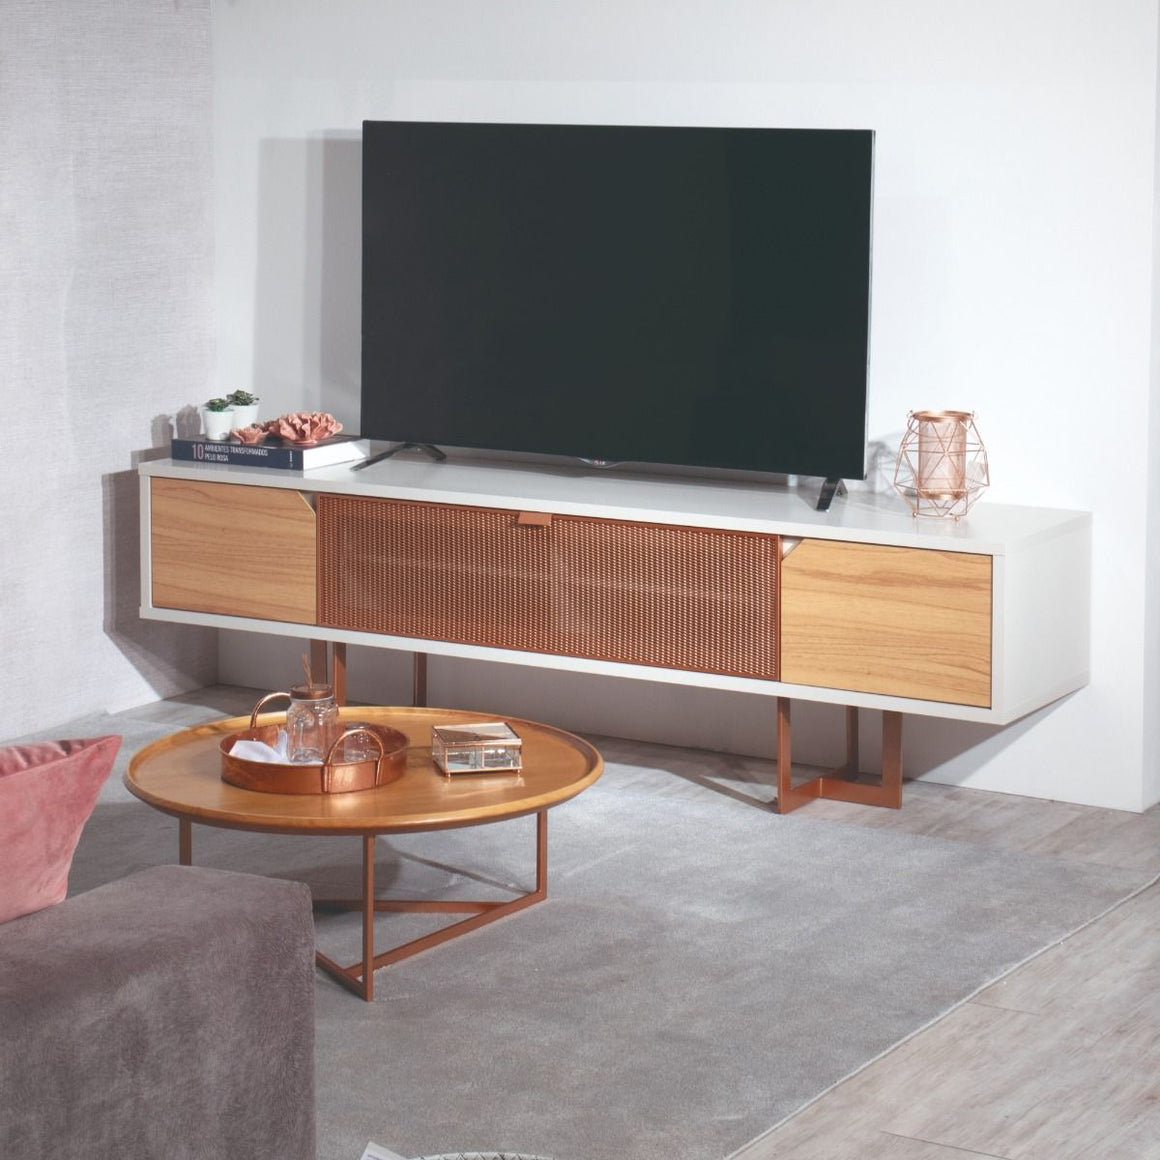 Knickerbocker 81.1 Modern TV Stand with Grated Steel Flip Down Door and Steel Base in Cinnamon and Off White